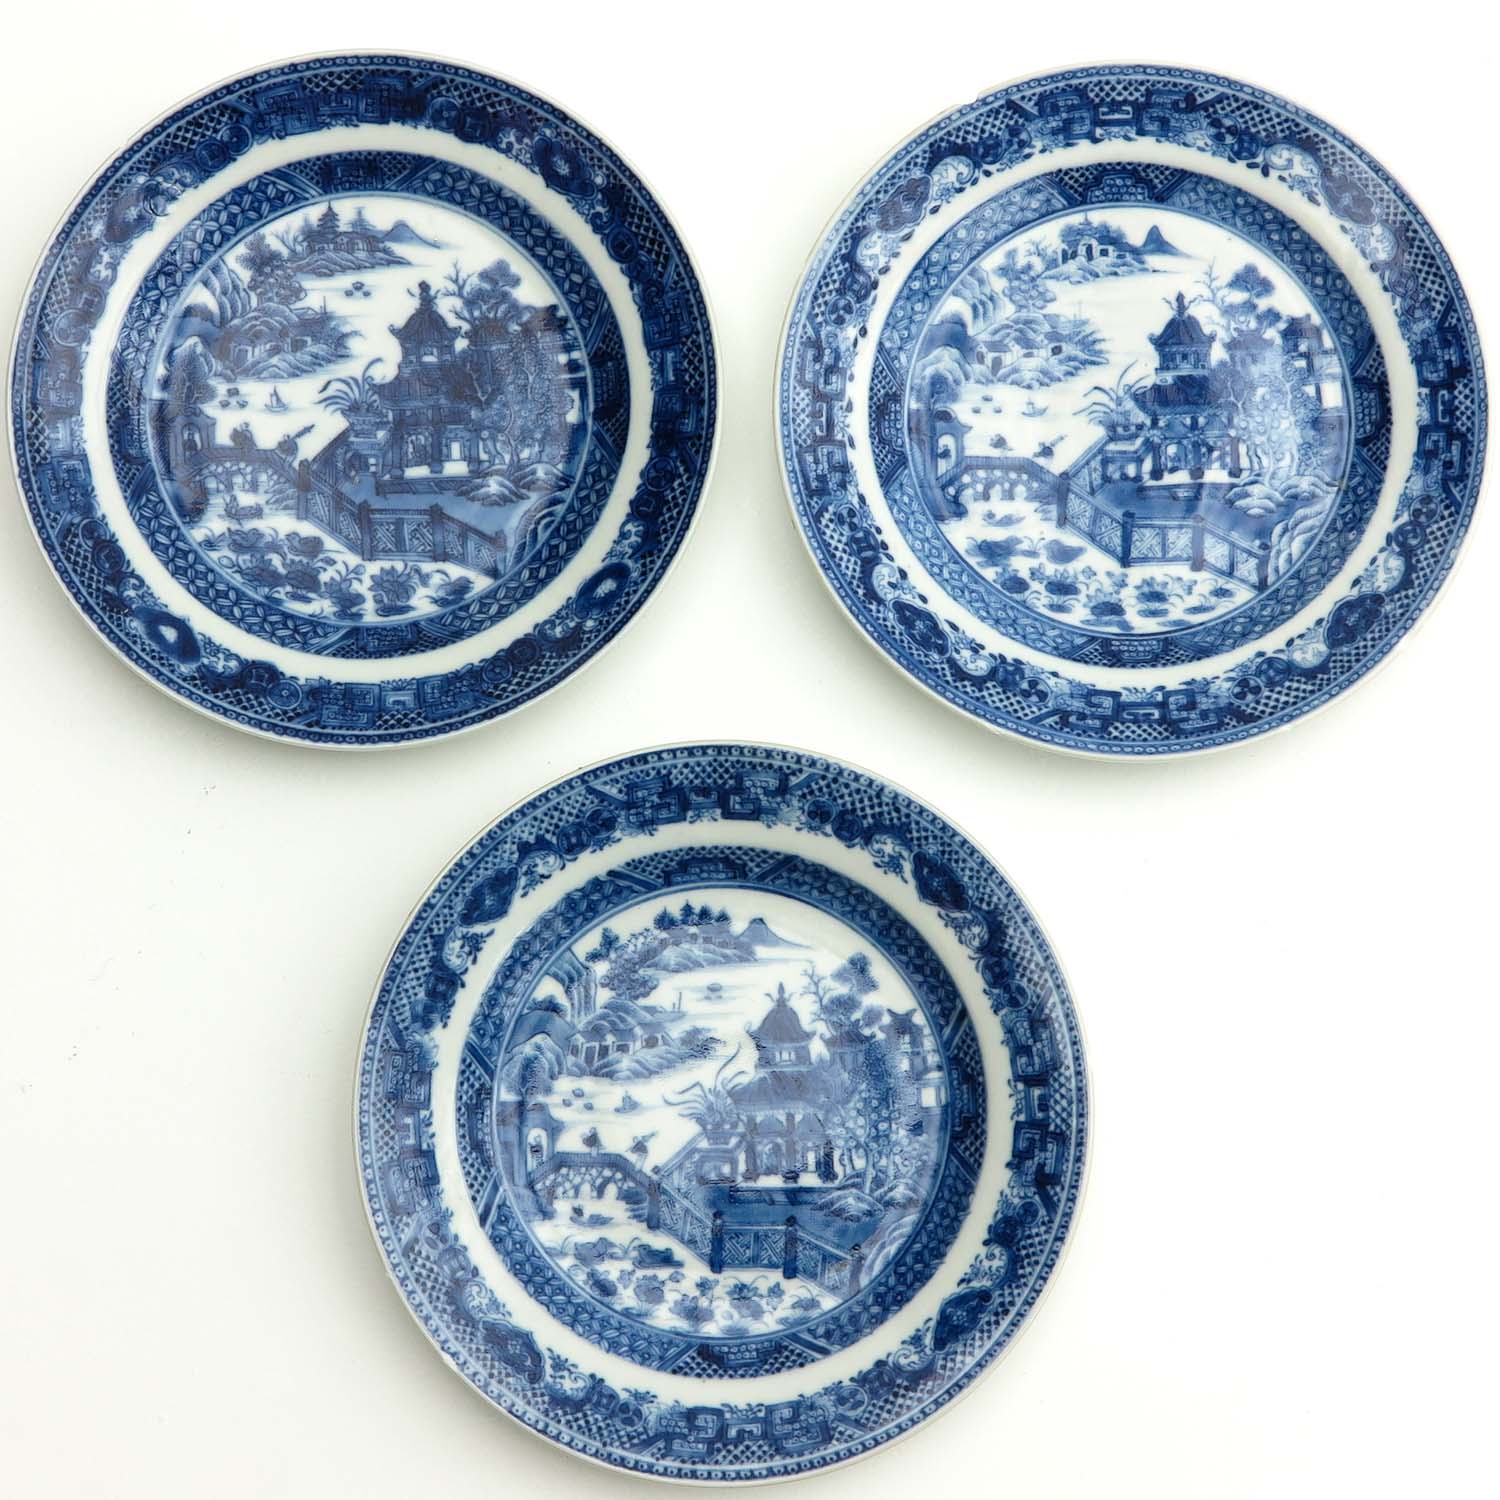 A Series of 5 Blue and White Plates - Image 3 of 9